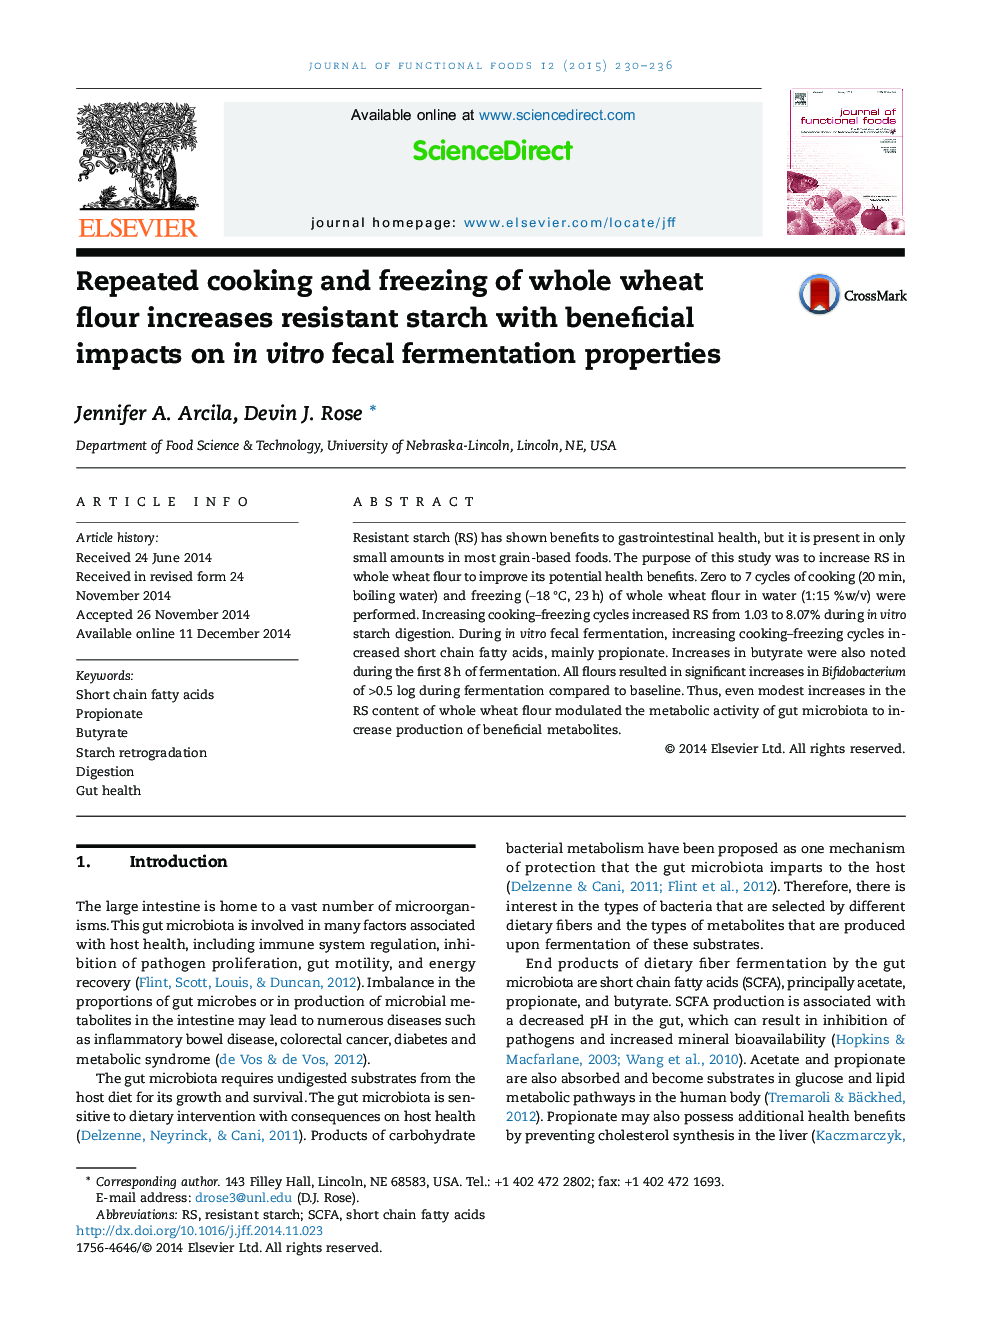 Repeated cooking and freezing of whole wheat flour increases resistant starch with beneficial impacts on in vitro fecal fermentation properties